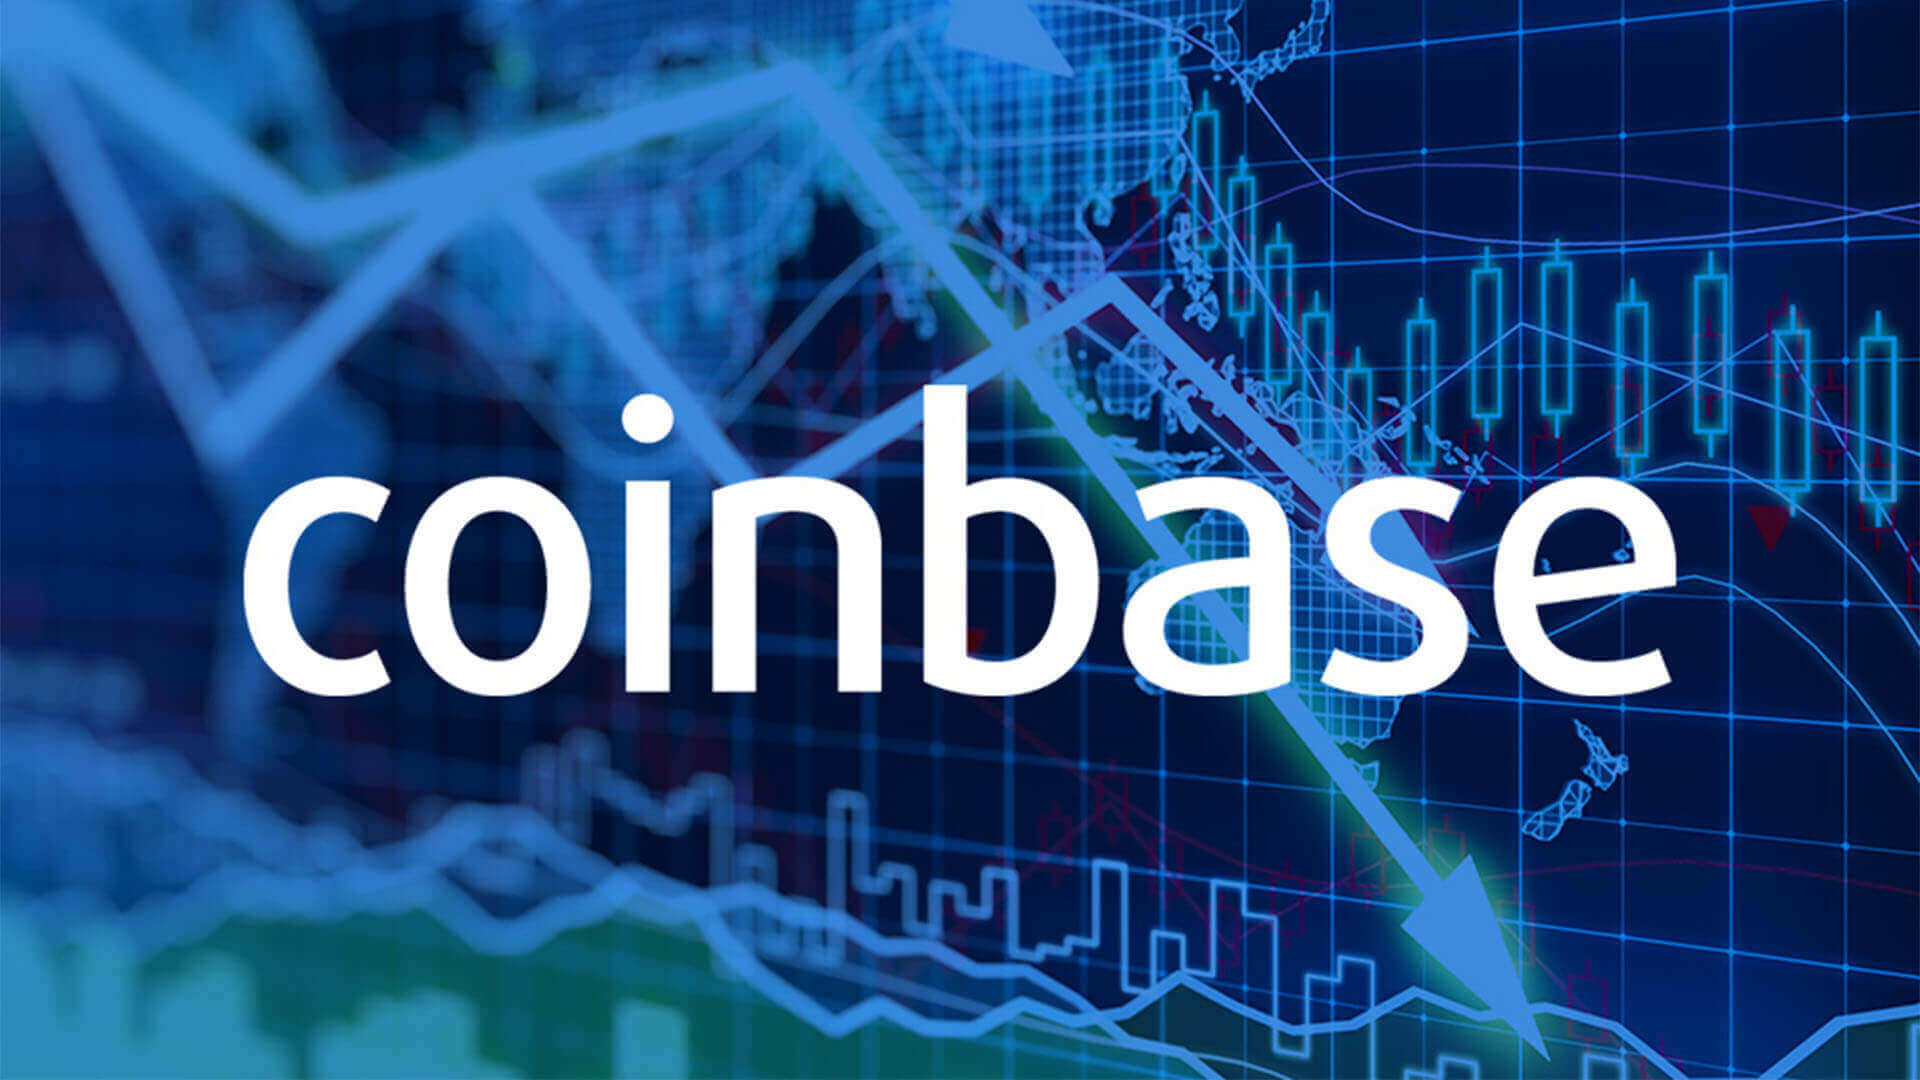 cryptocurrency exchange coinbase